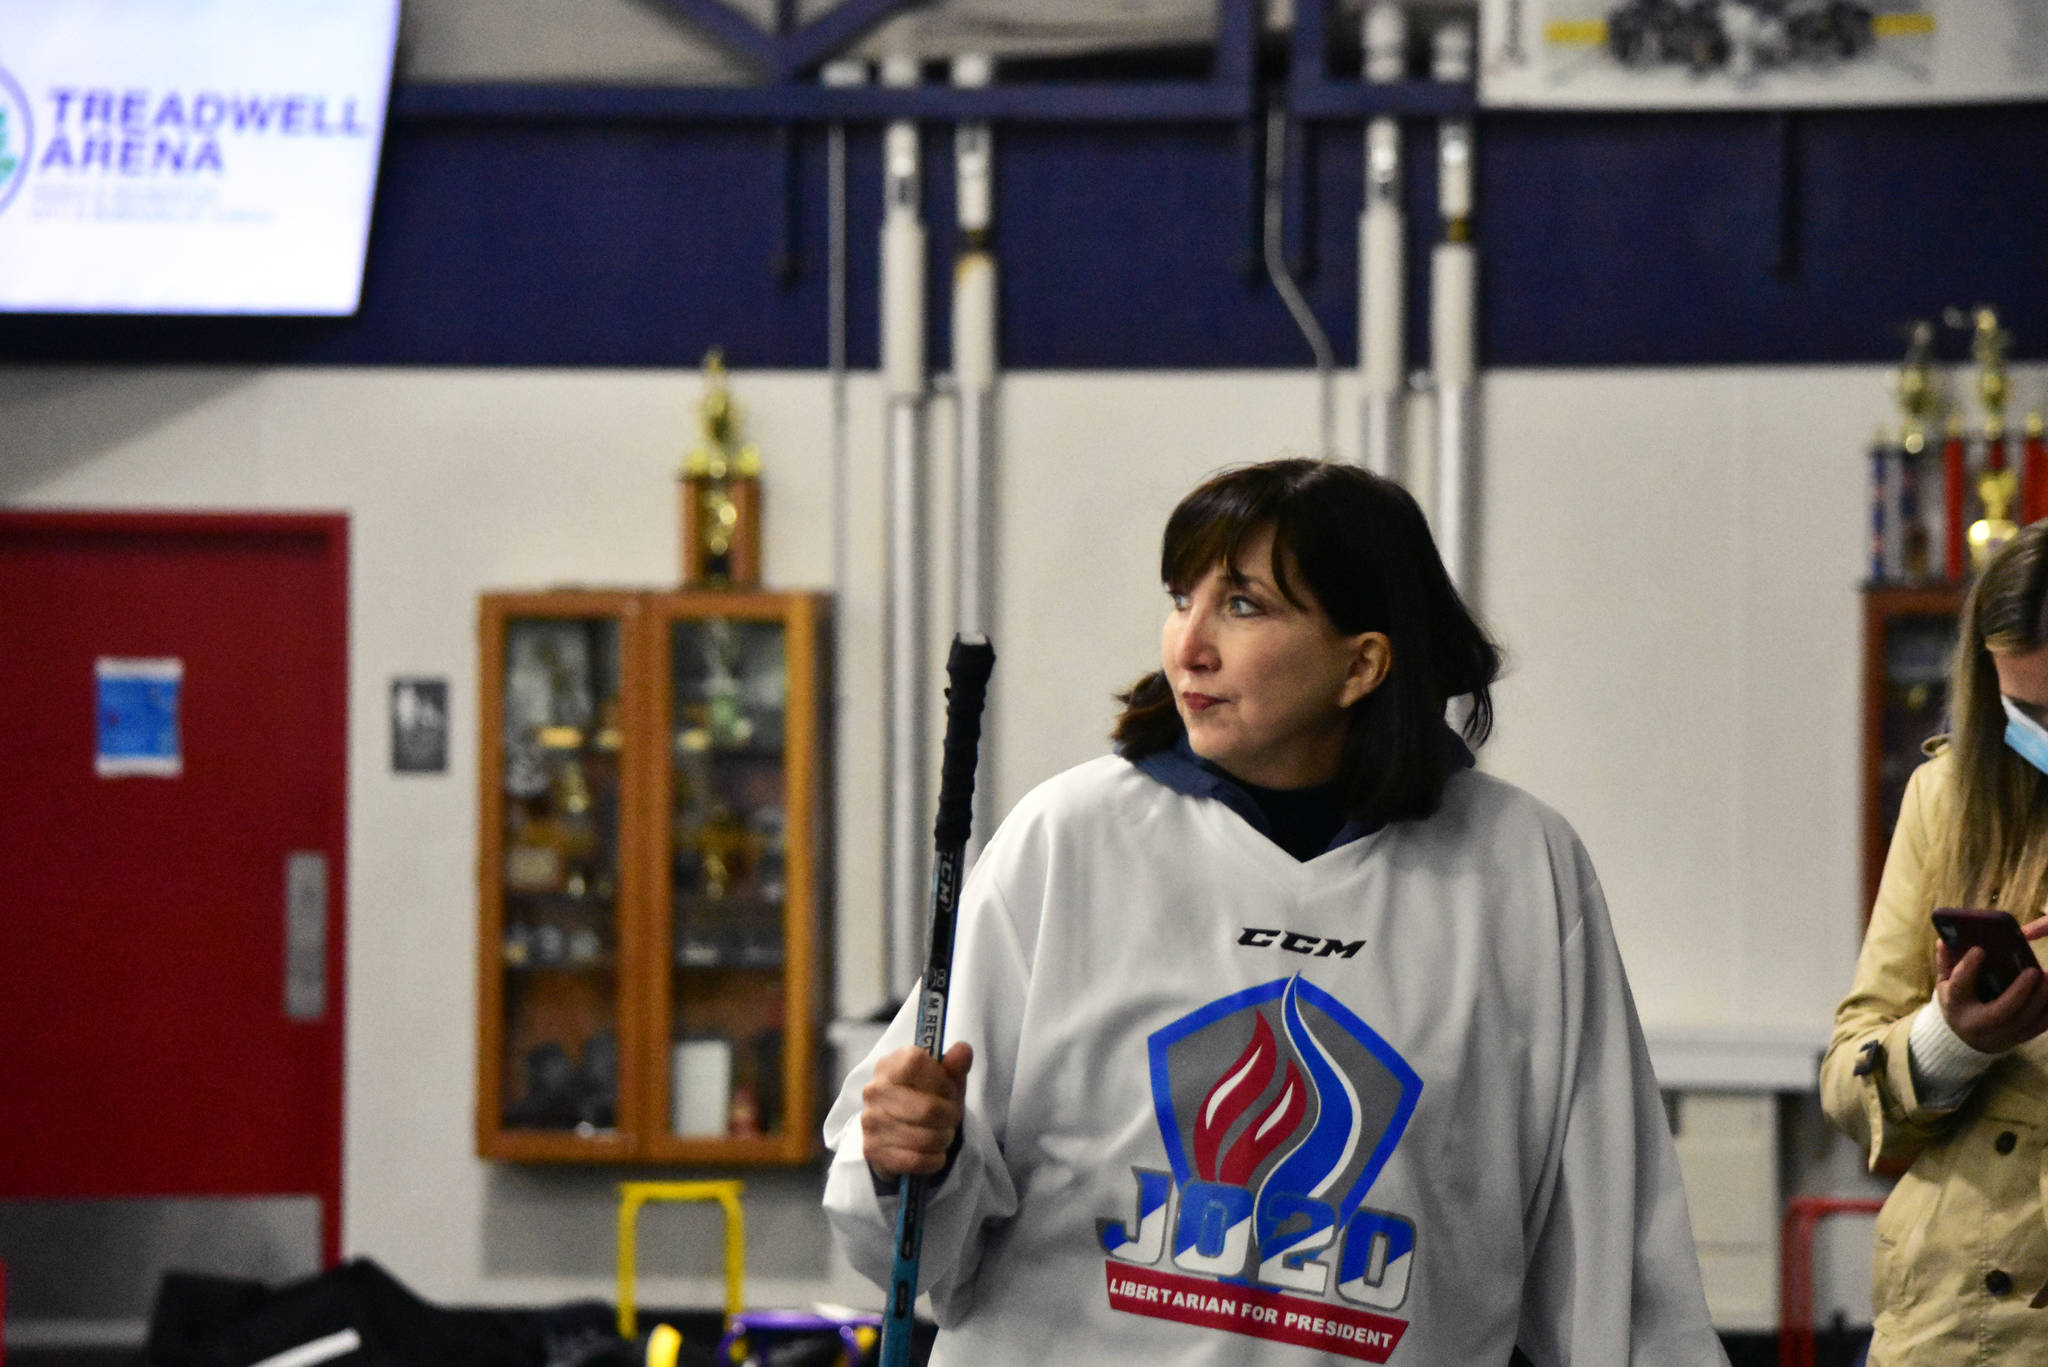 Libertarian presidential candidate Jo Jorgensen was in Juneau Tuesday, Sept. 8, 2020, meeting with residents and business owners, and to play a quick game of hockey with local players at the Treadwell Arena. (Peter Segall / Juneau Empire)